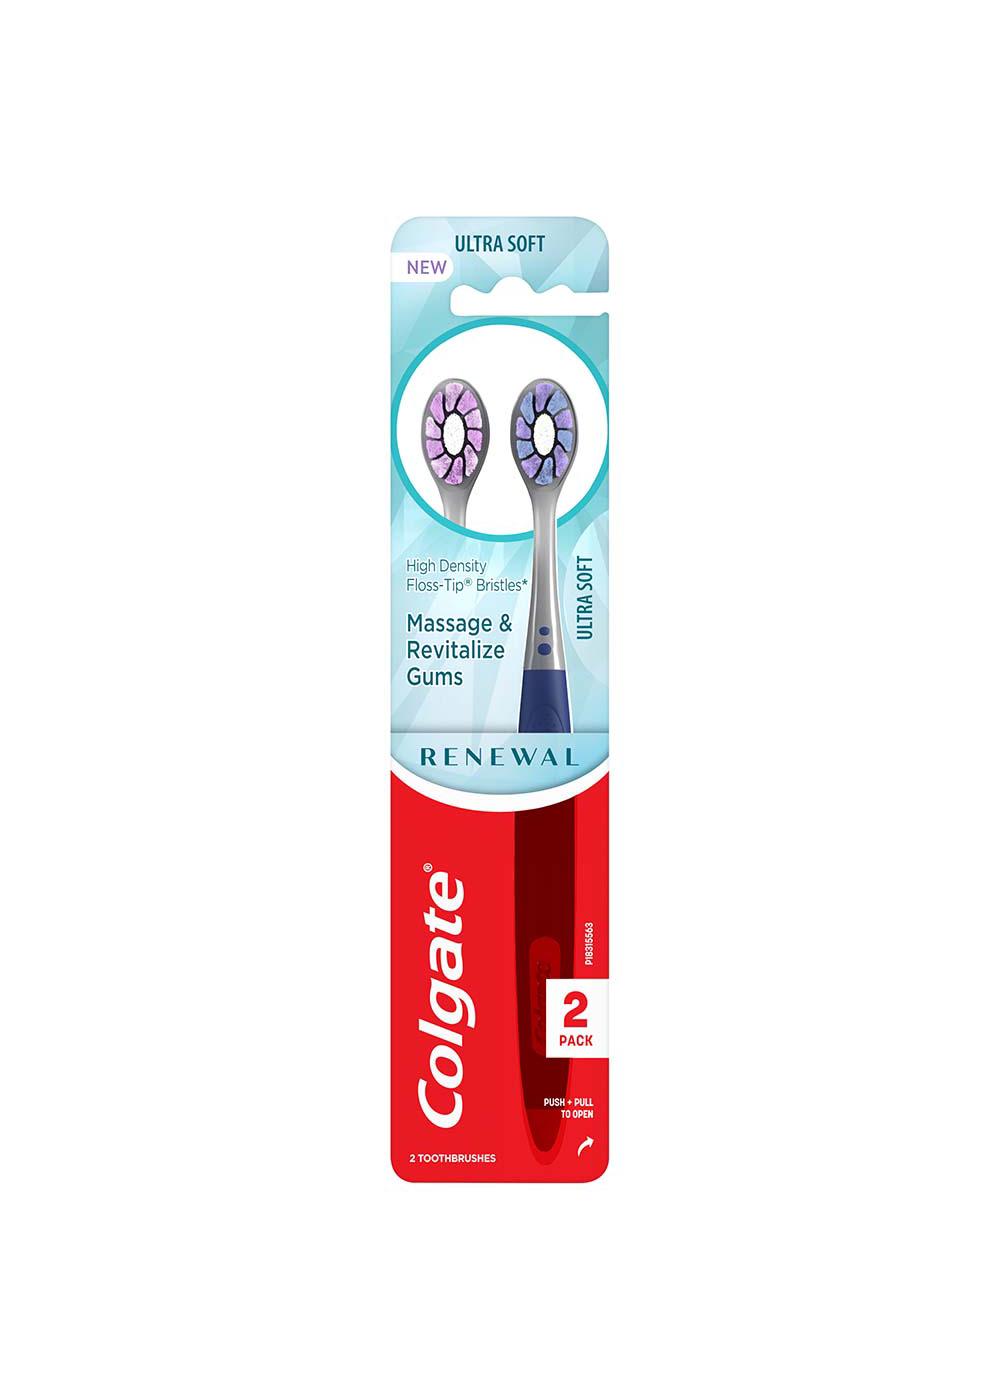 Colgate Renewal Ultra Soft Toothbrushes; image 1 of 3